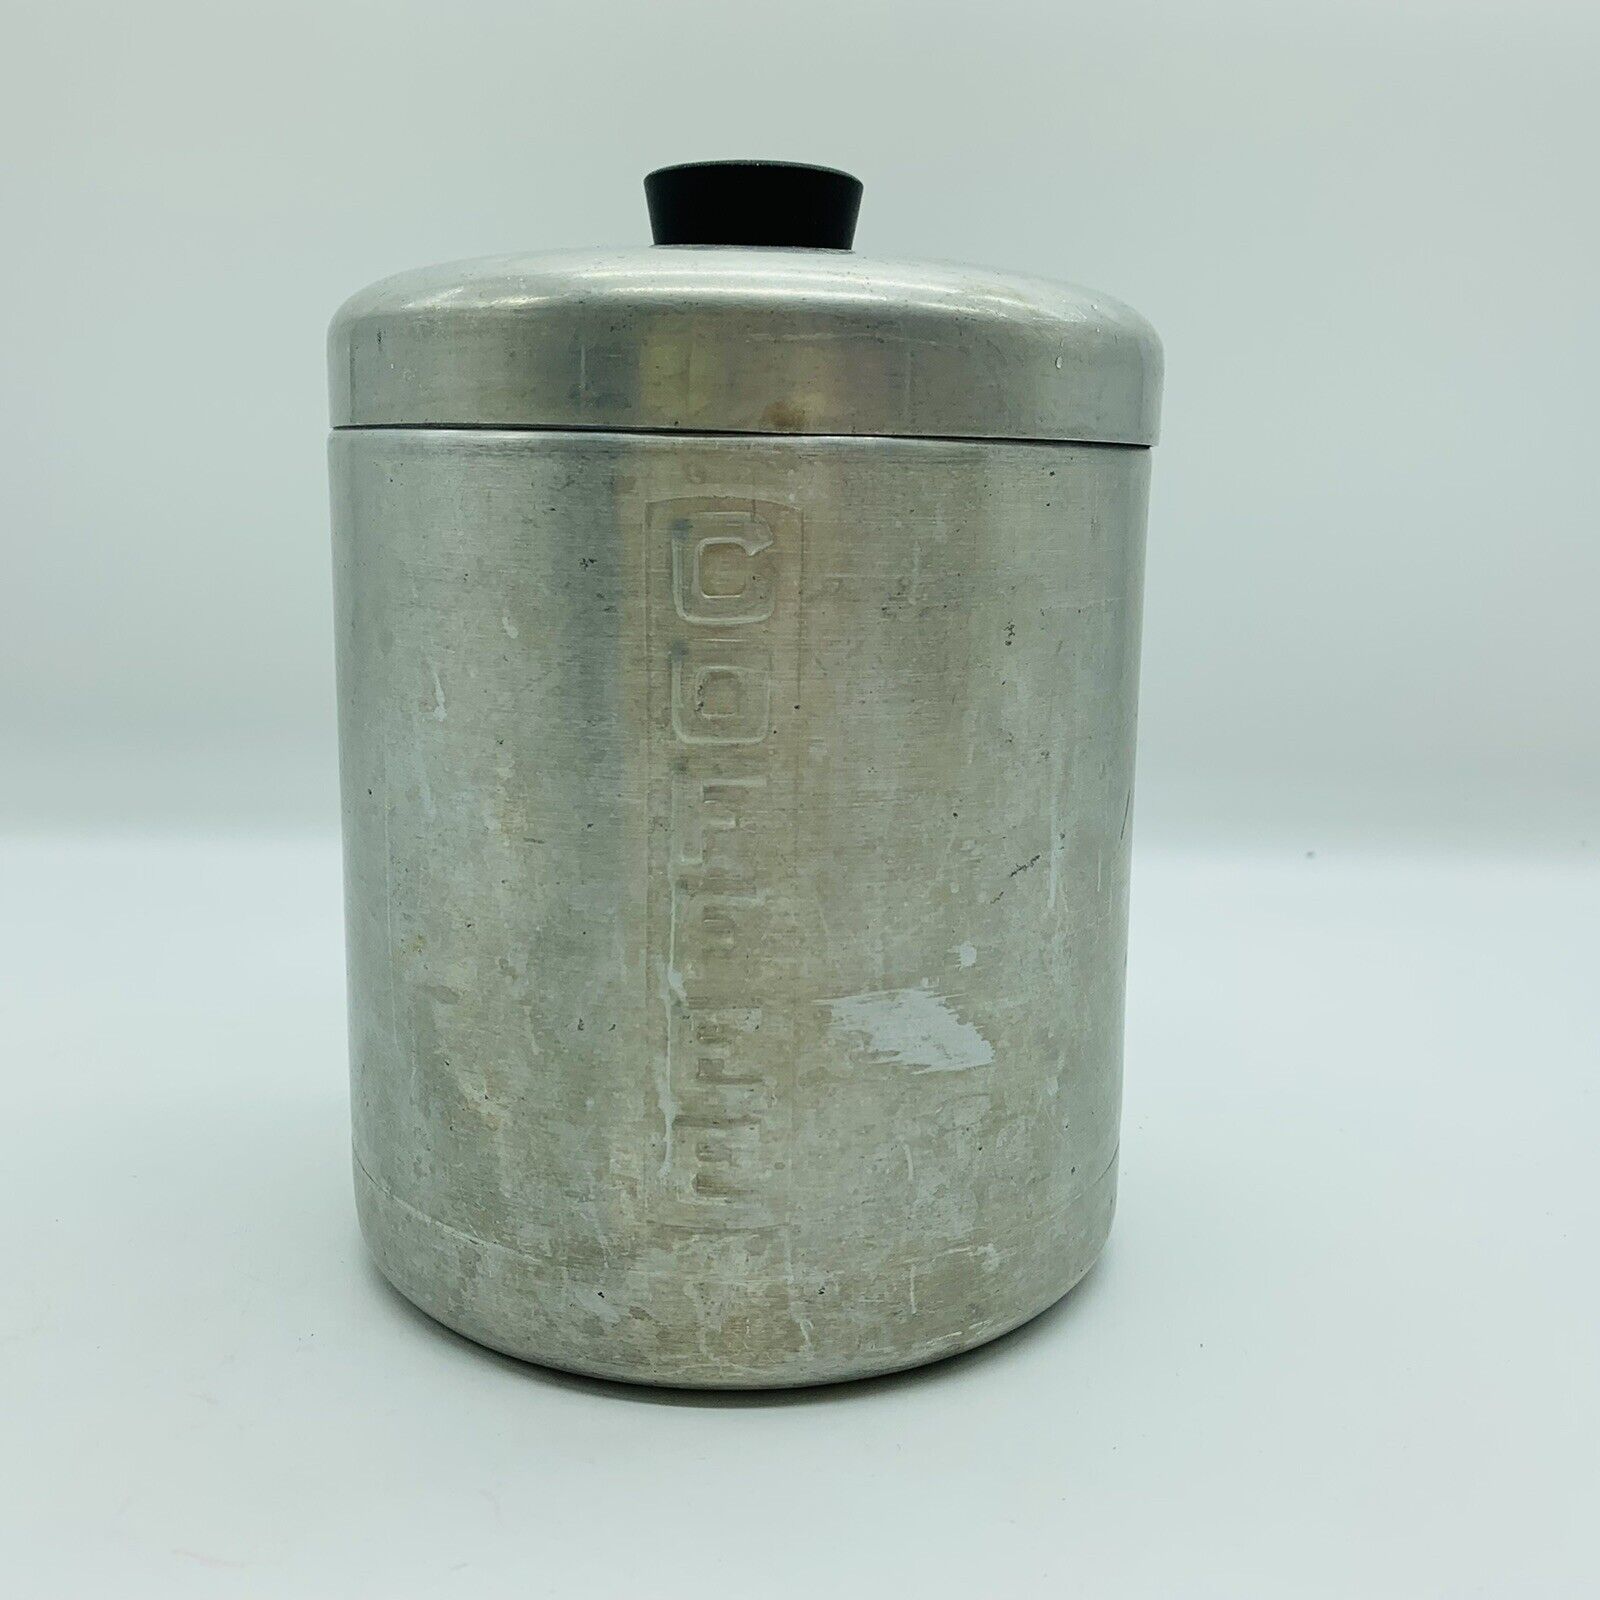 Metasco Vintage Aluminum Coffee Canister with 7” Made in Italy